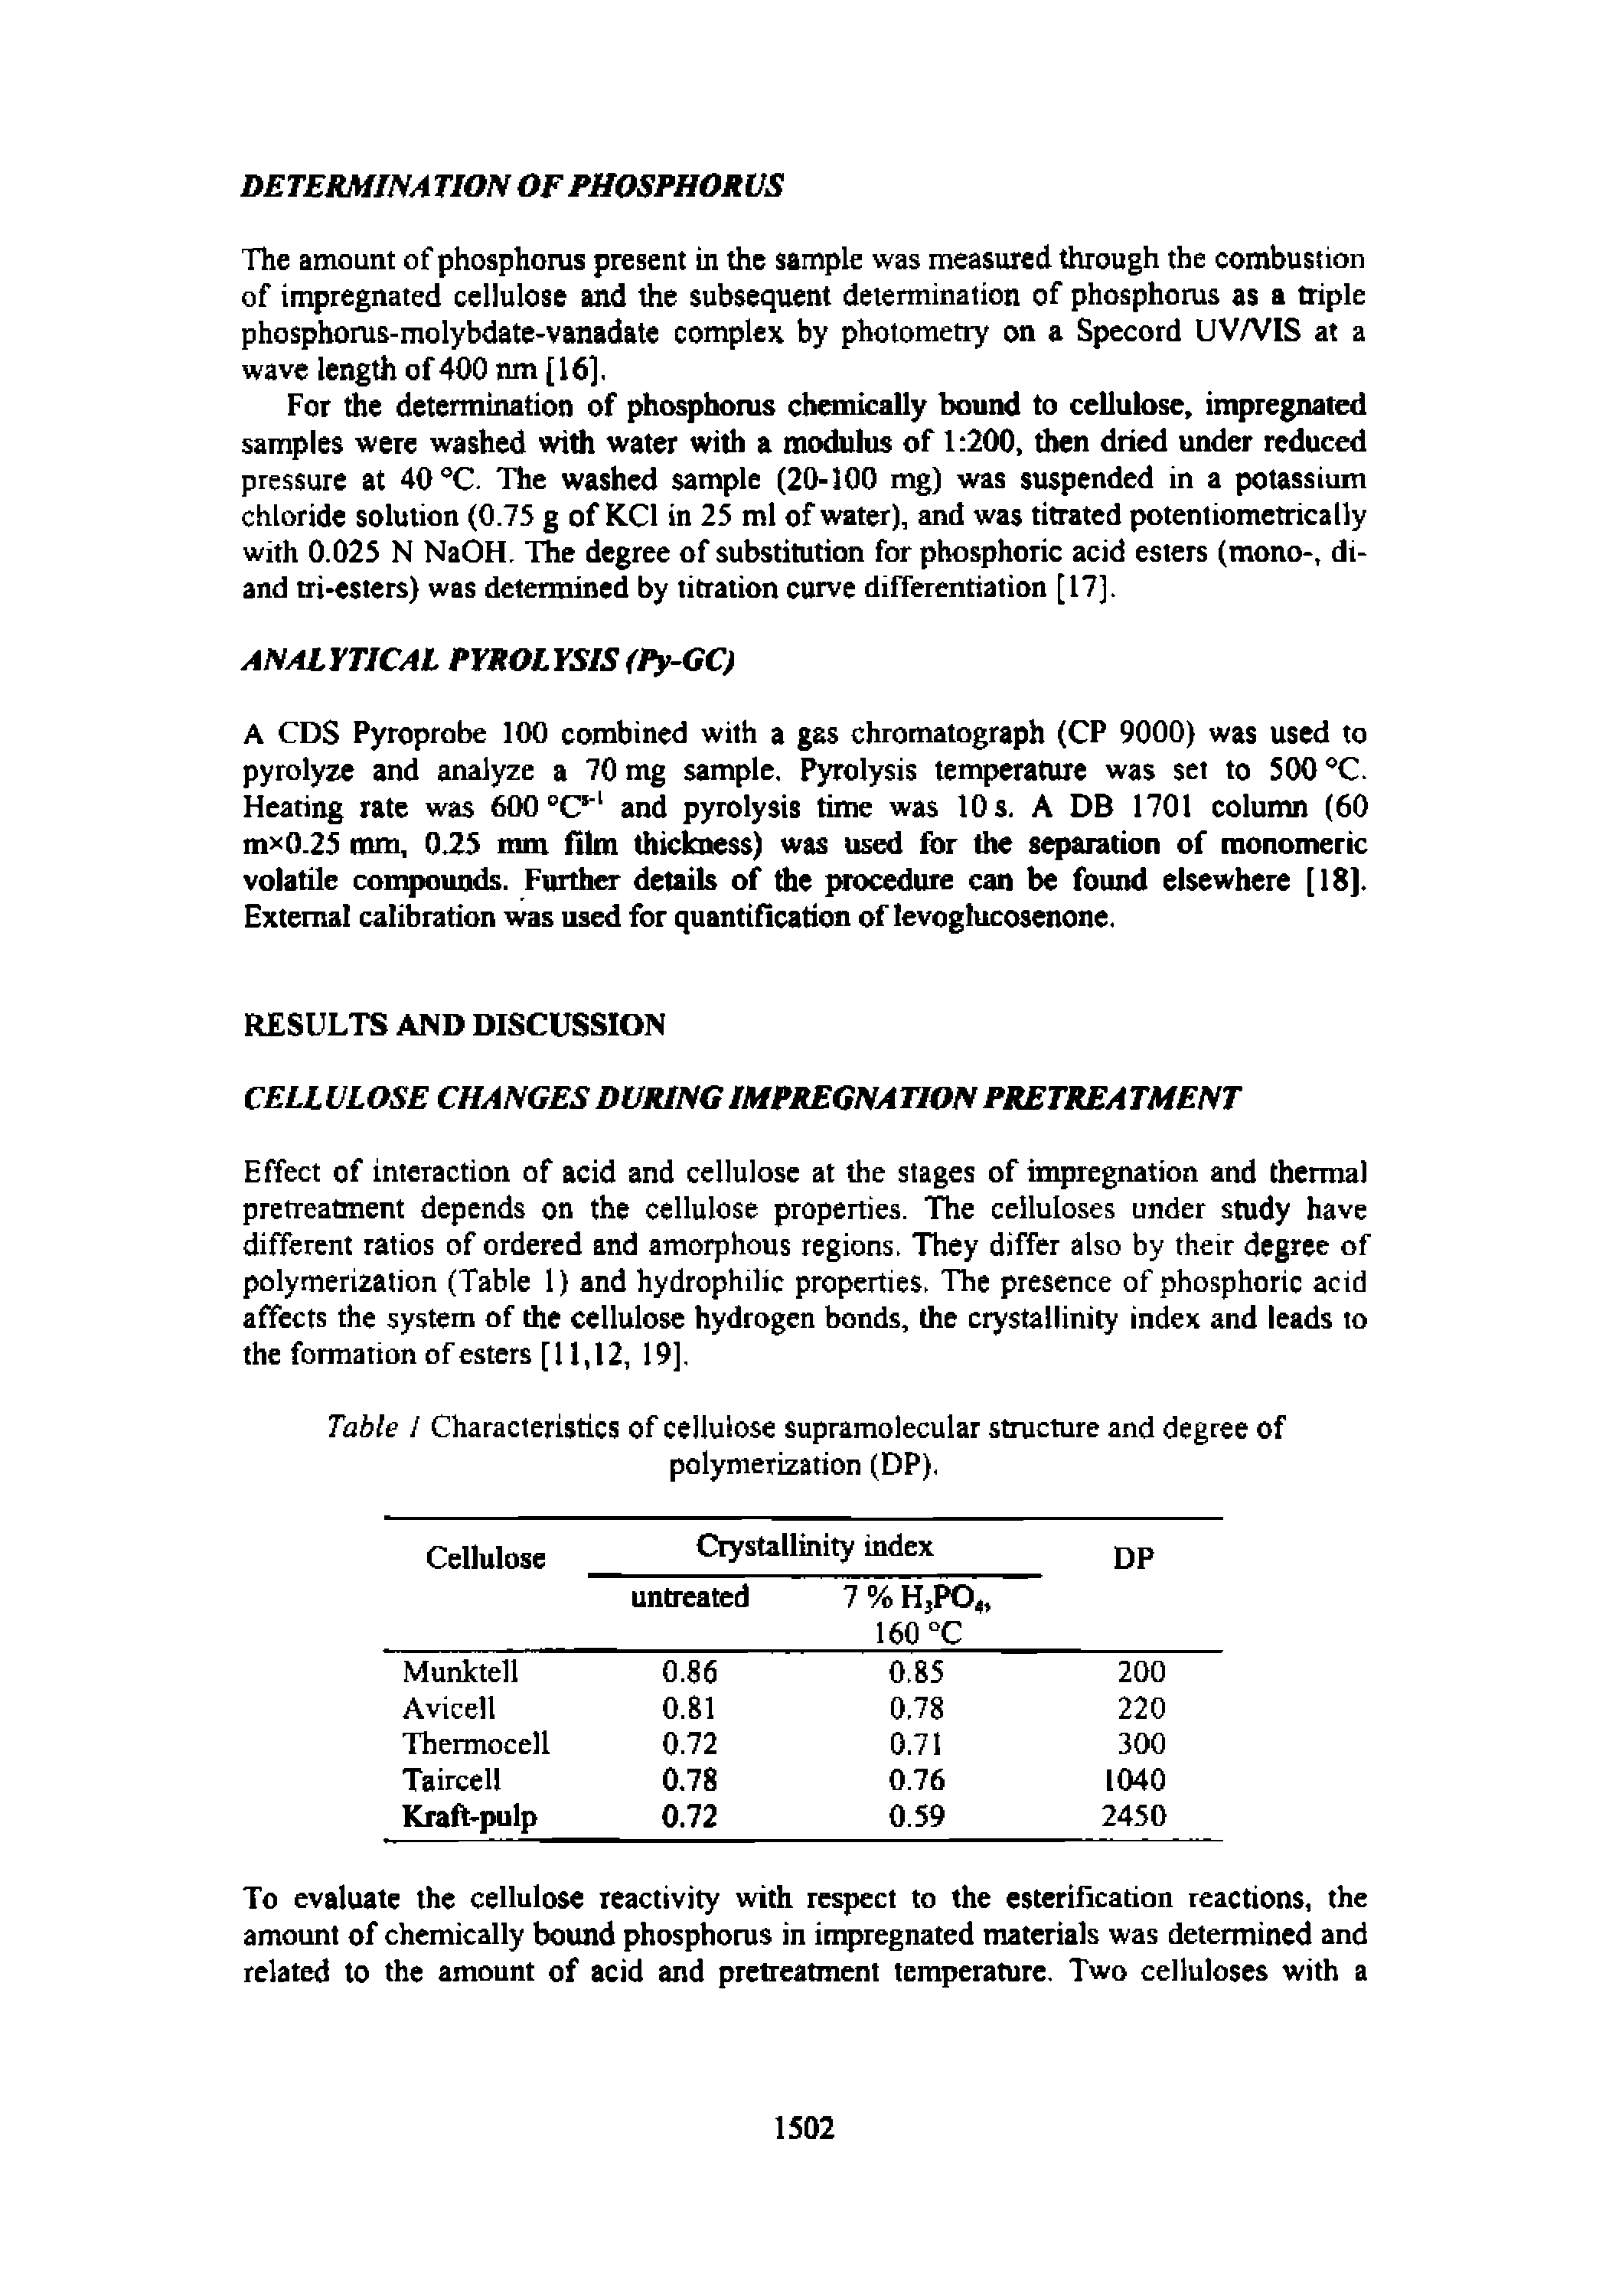 Table I Characteristics of cellulose supramolecular structure and degree of polymerization (DP).